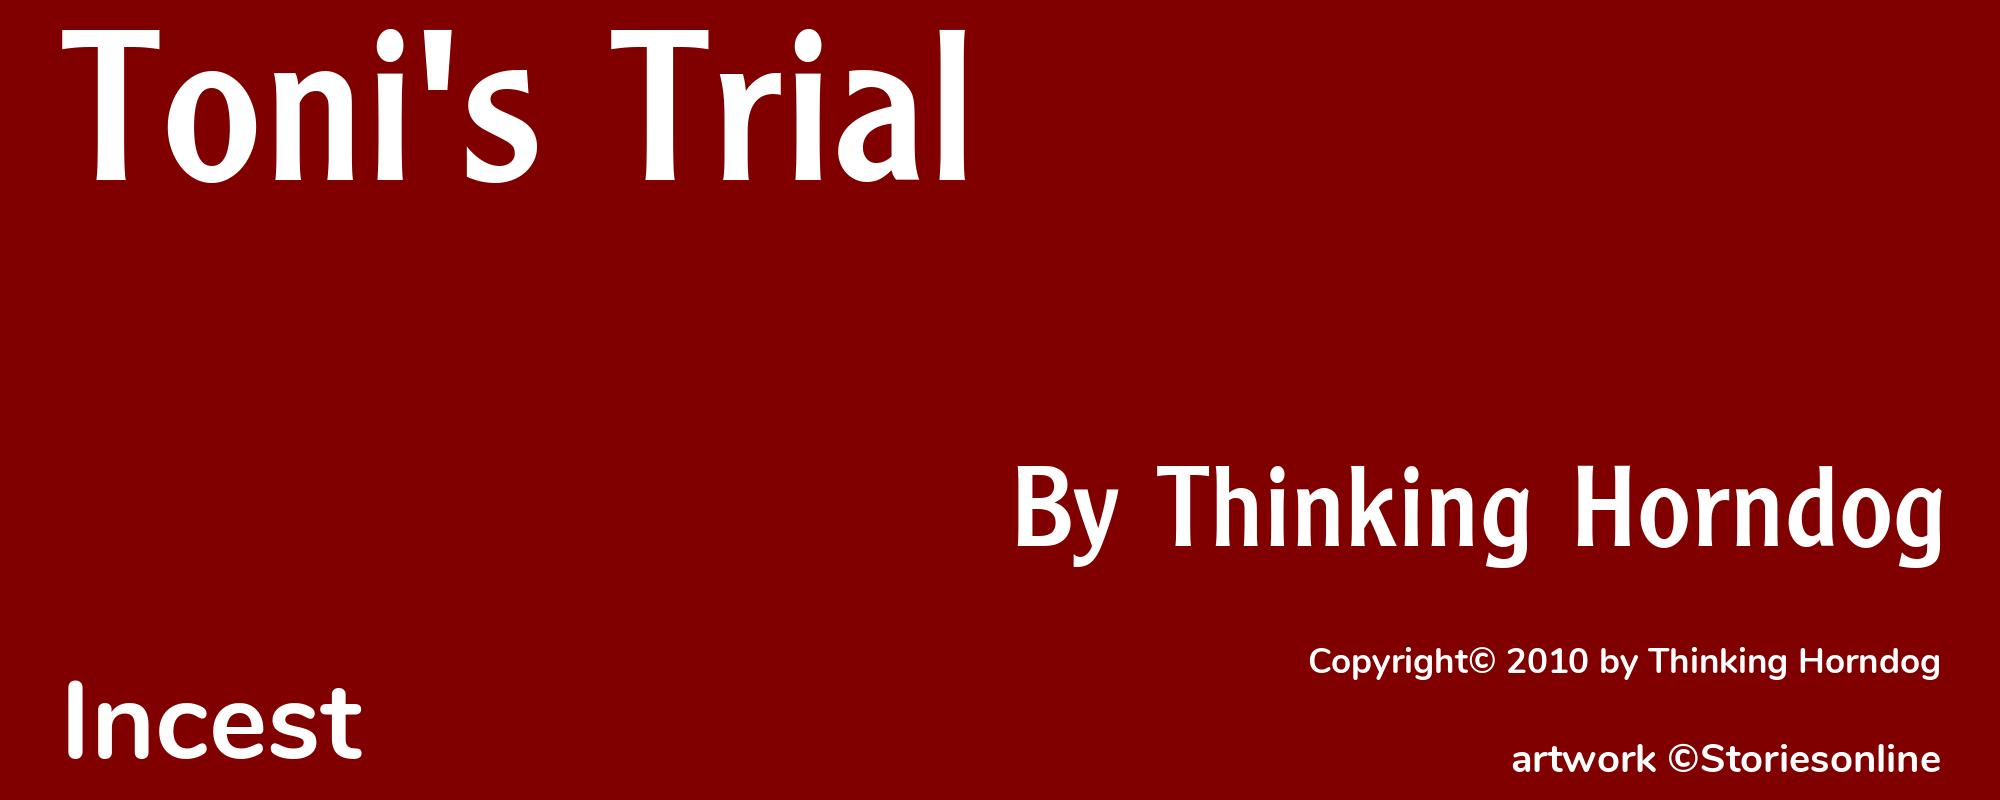 Toni's Trial - Cover